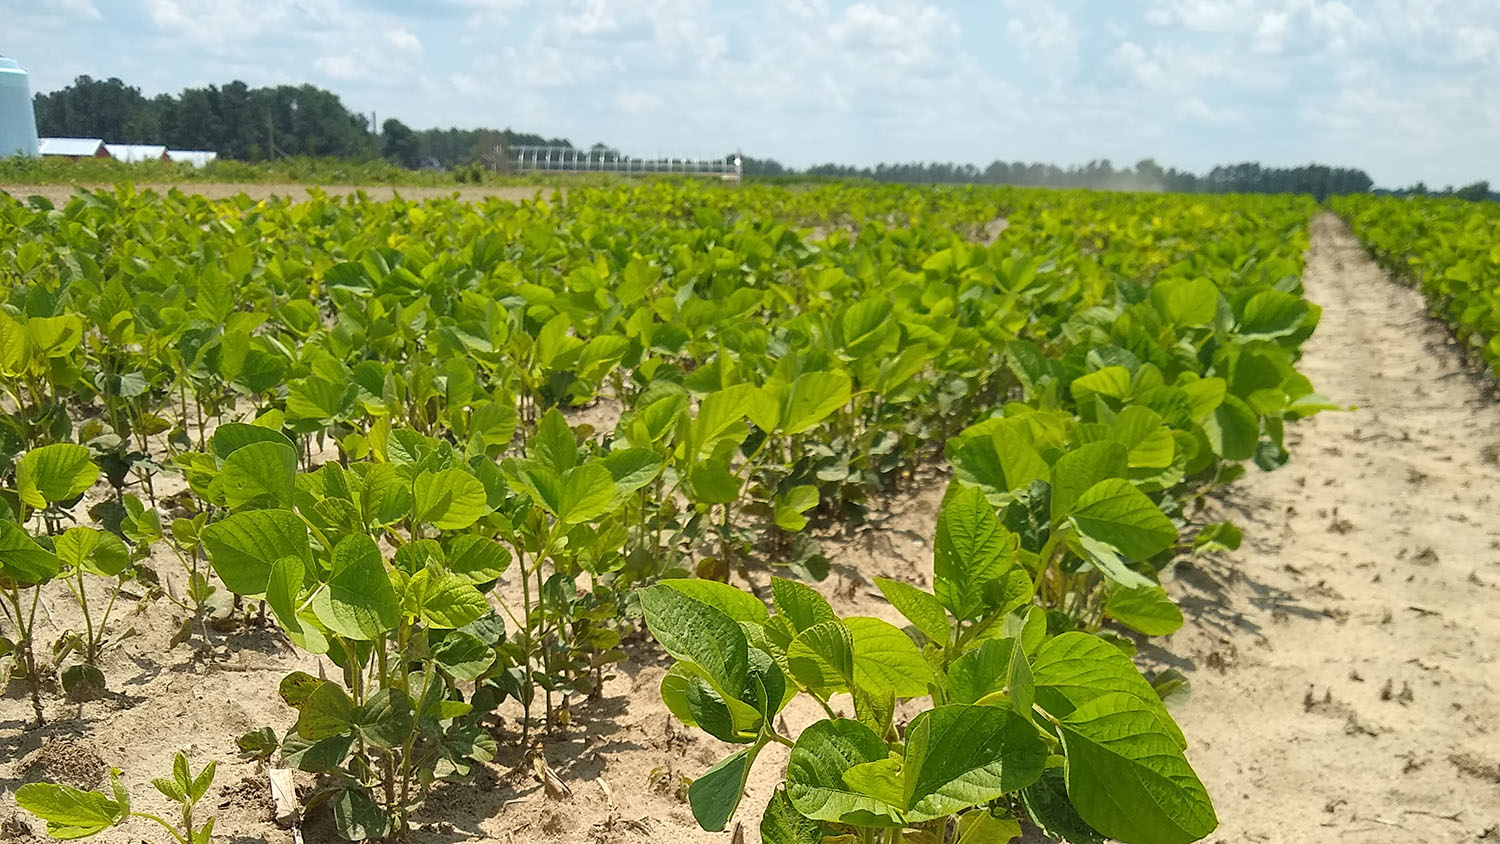 Header for news post - rows of planted soybeans